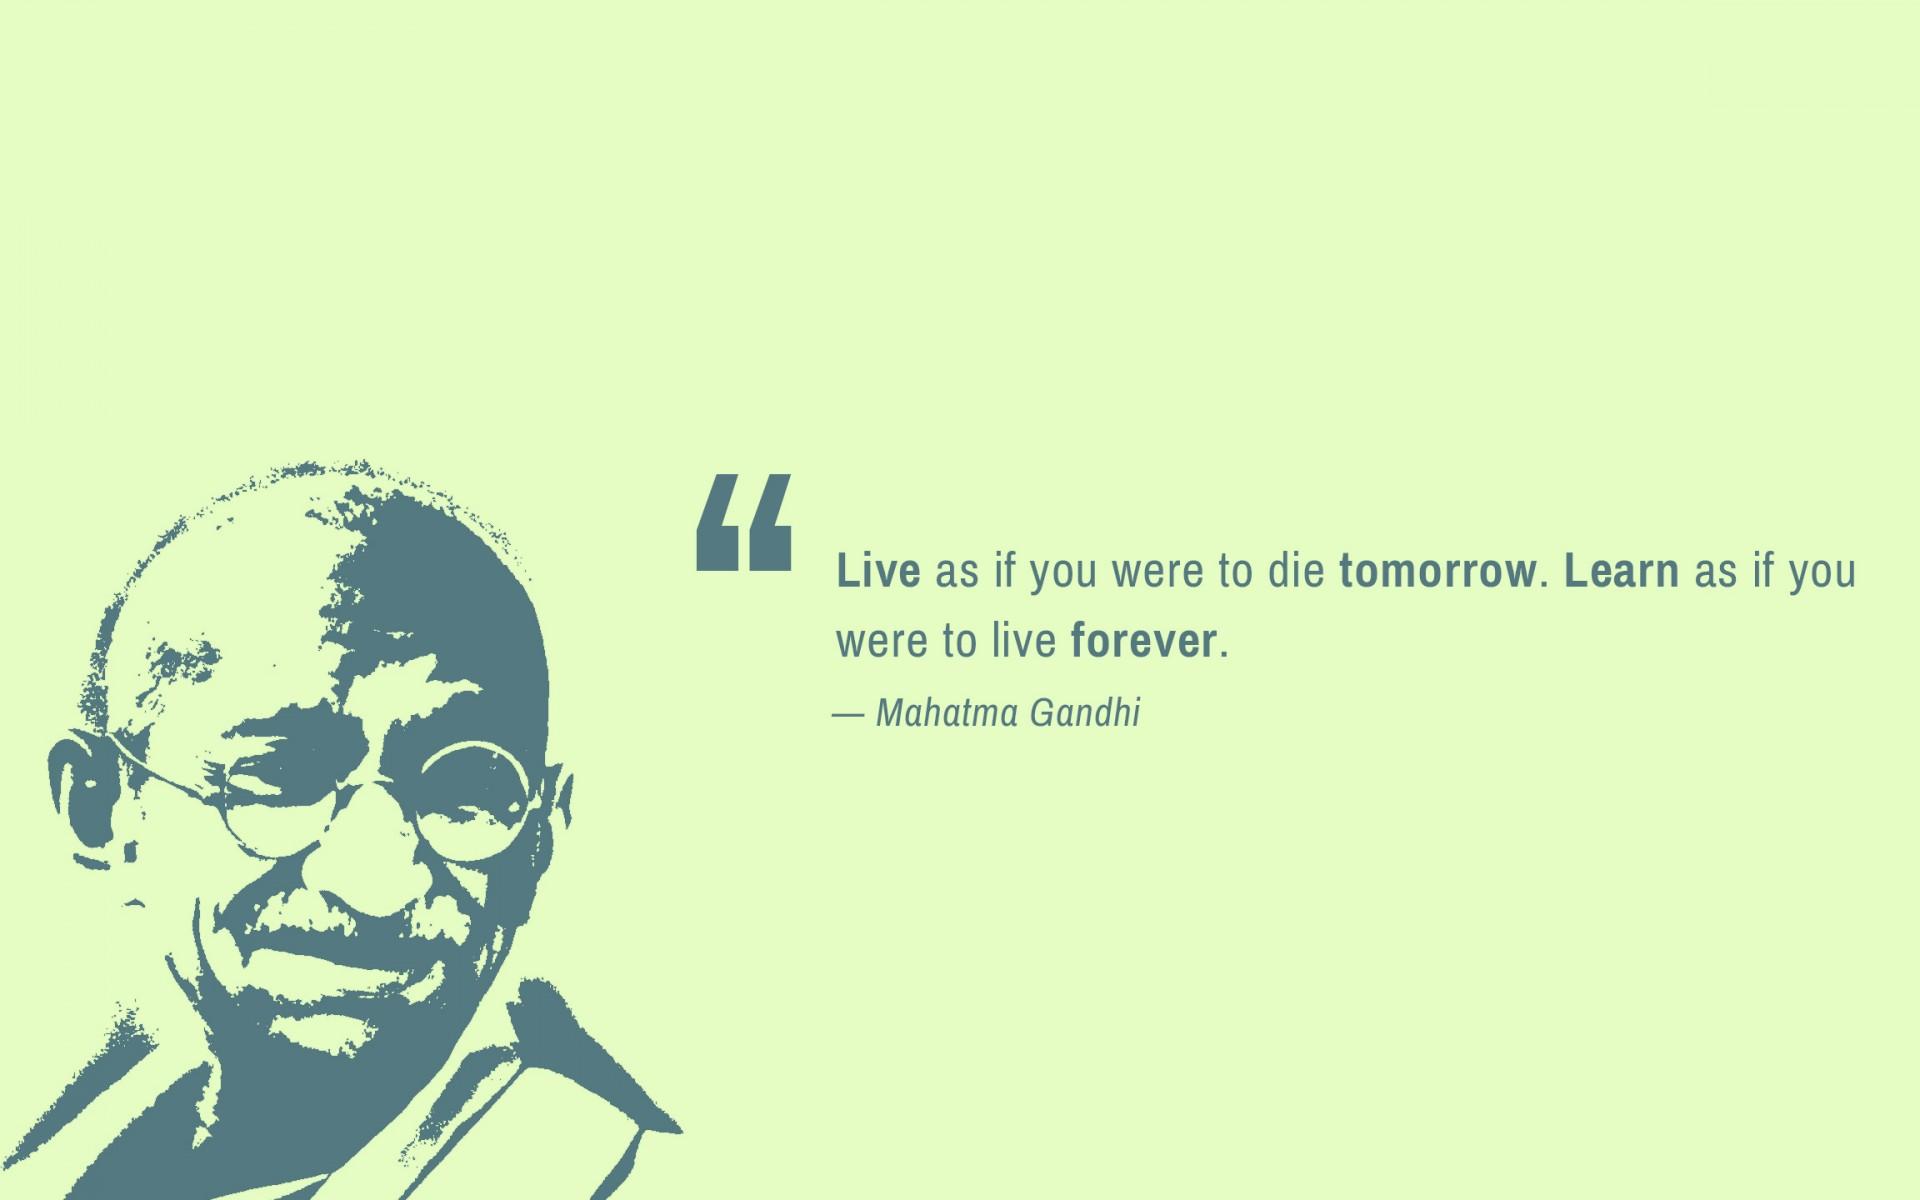 Wallpapers Live forever, Die tomorrow, Mahatma Gandhi, Popular quotes